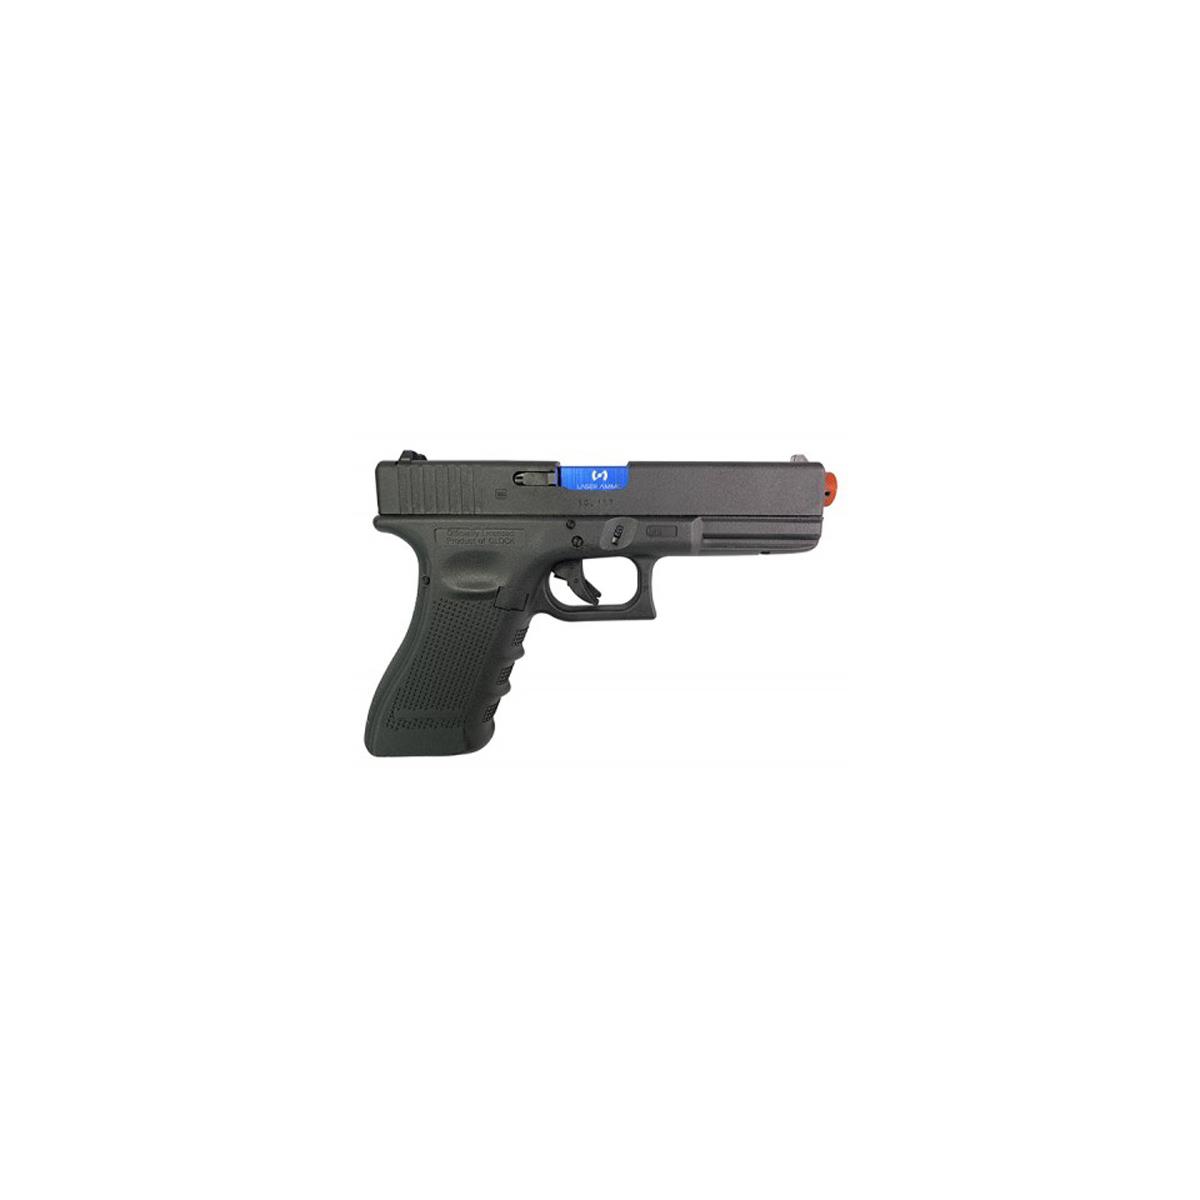 Image of Laser Ammo Recoil Enabled Training Pistol Umarex G17 CO2 Blowback with Red Laser